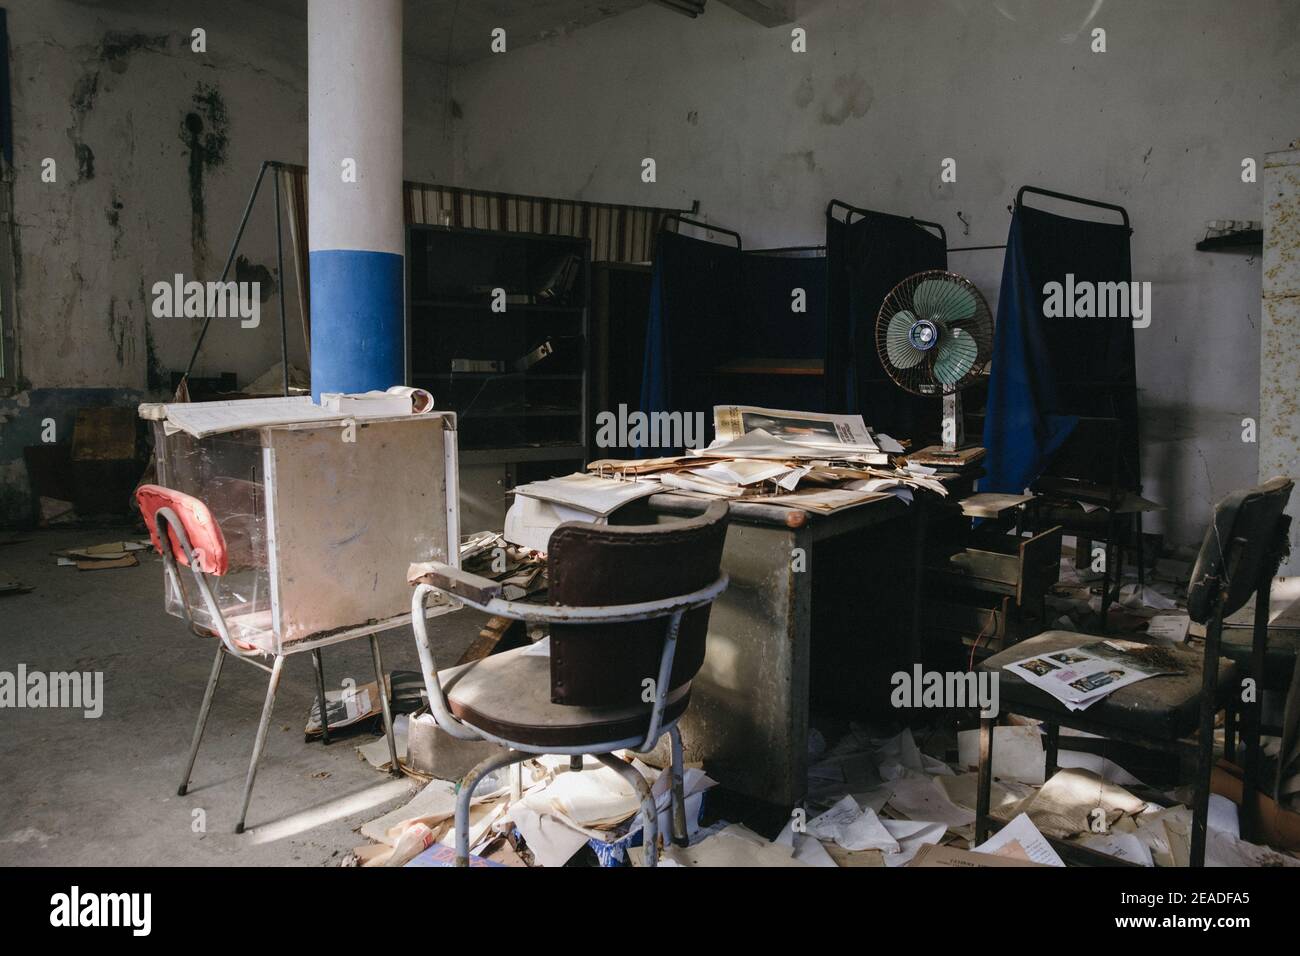 Old abandoned office with tables, chairs, shelves, documents, and a fan Stock Photo